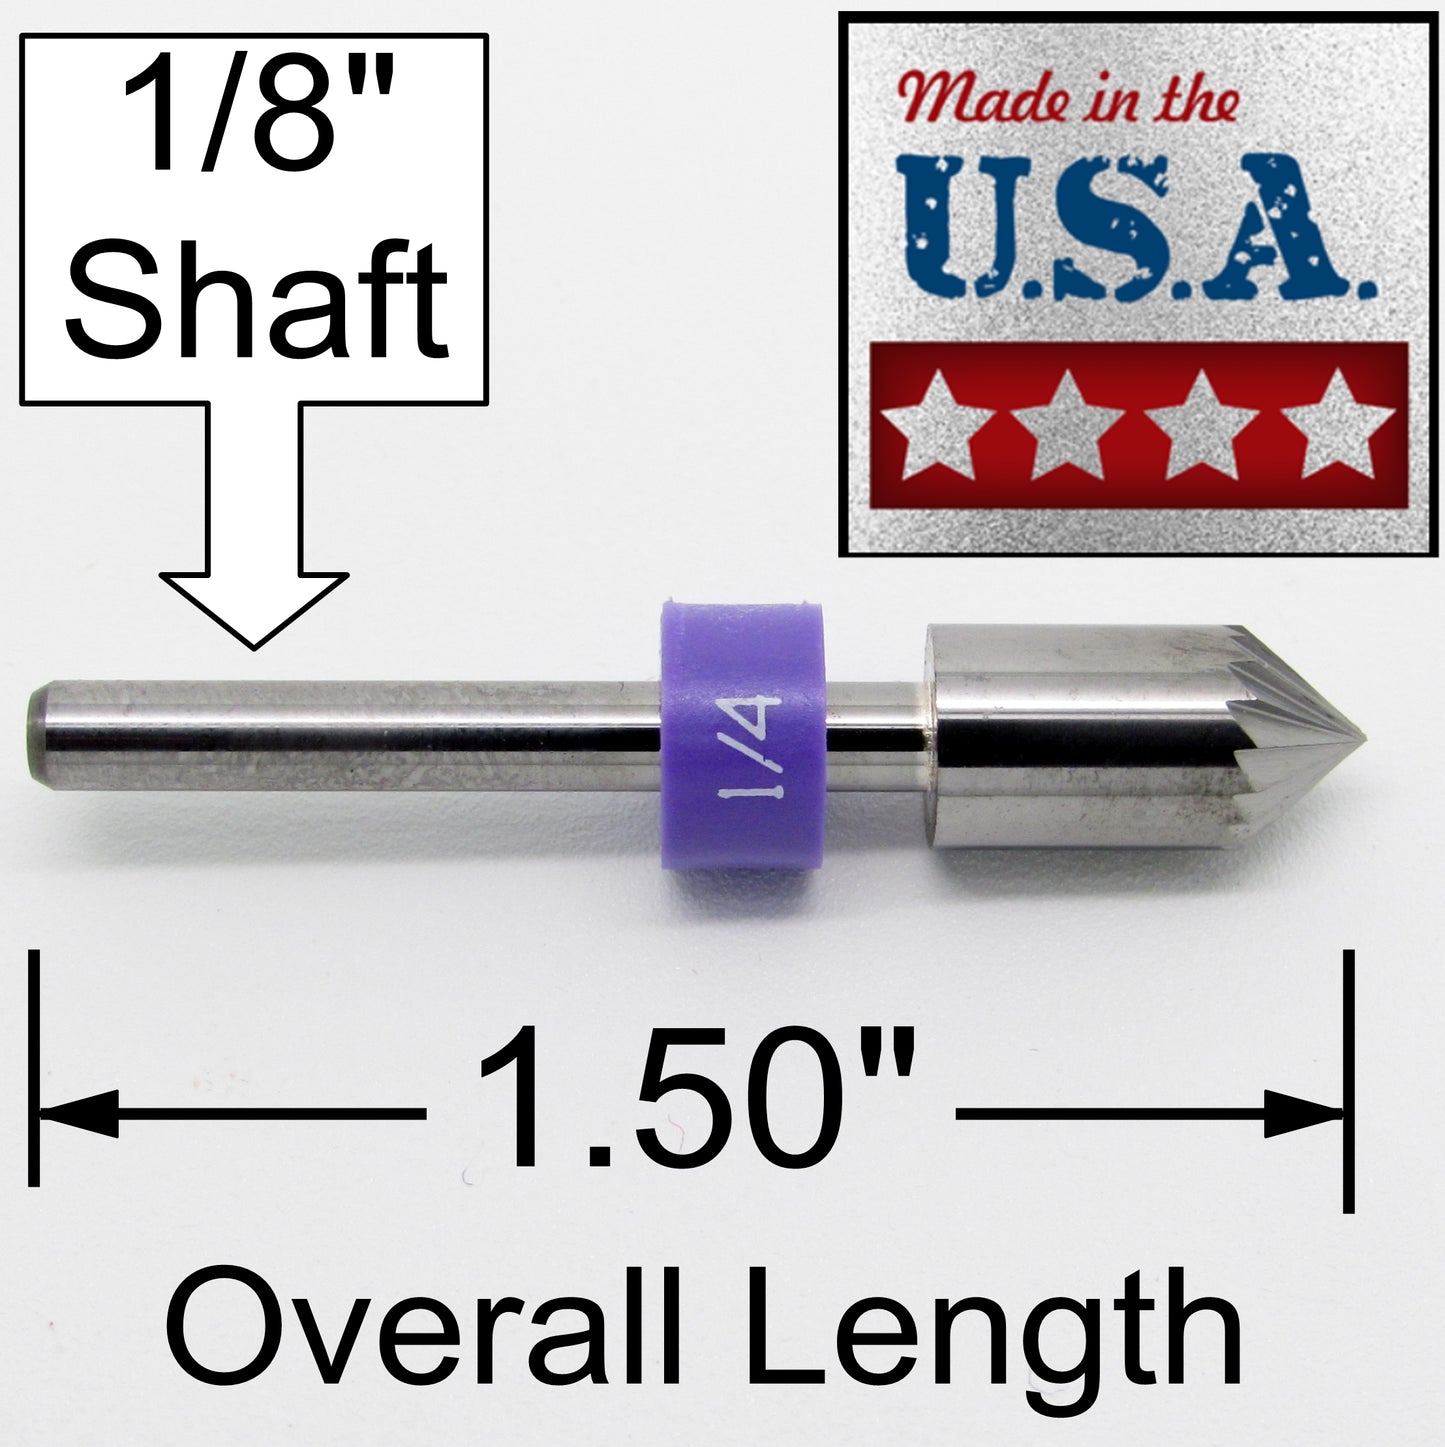 1/4" .250" 82 Degree Carbide Countersink - 16 Flutes - 1/8" Shank - Made in USA